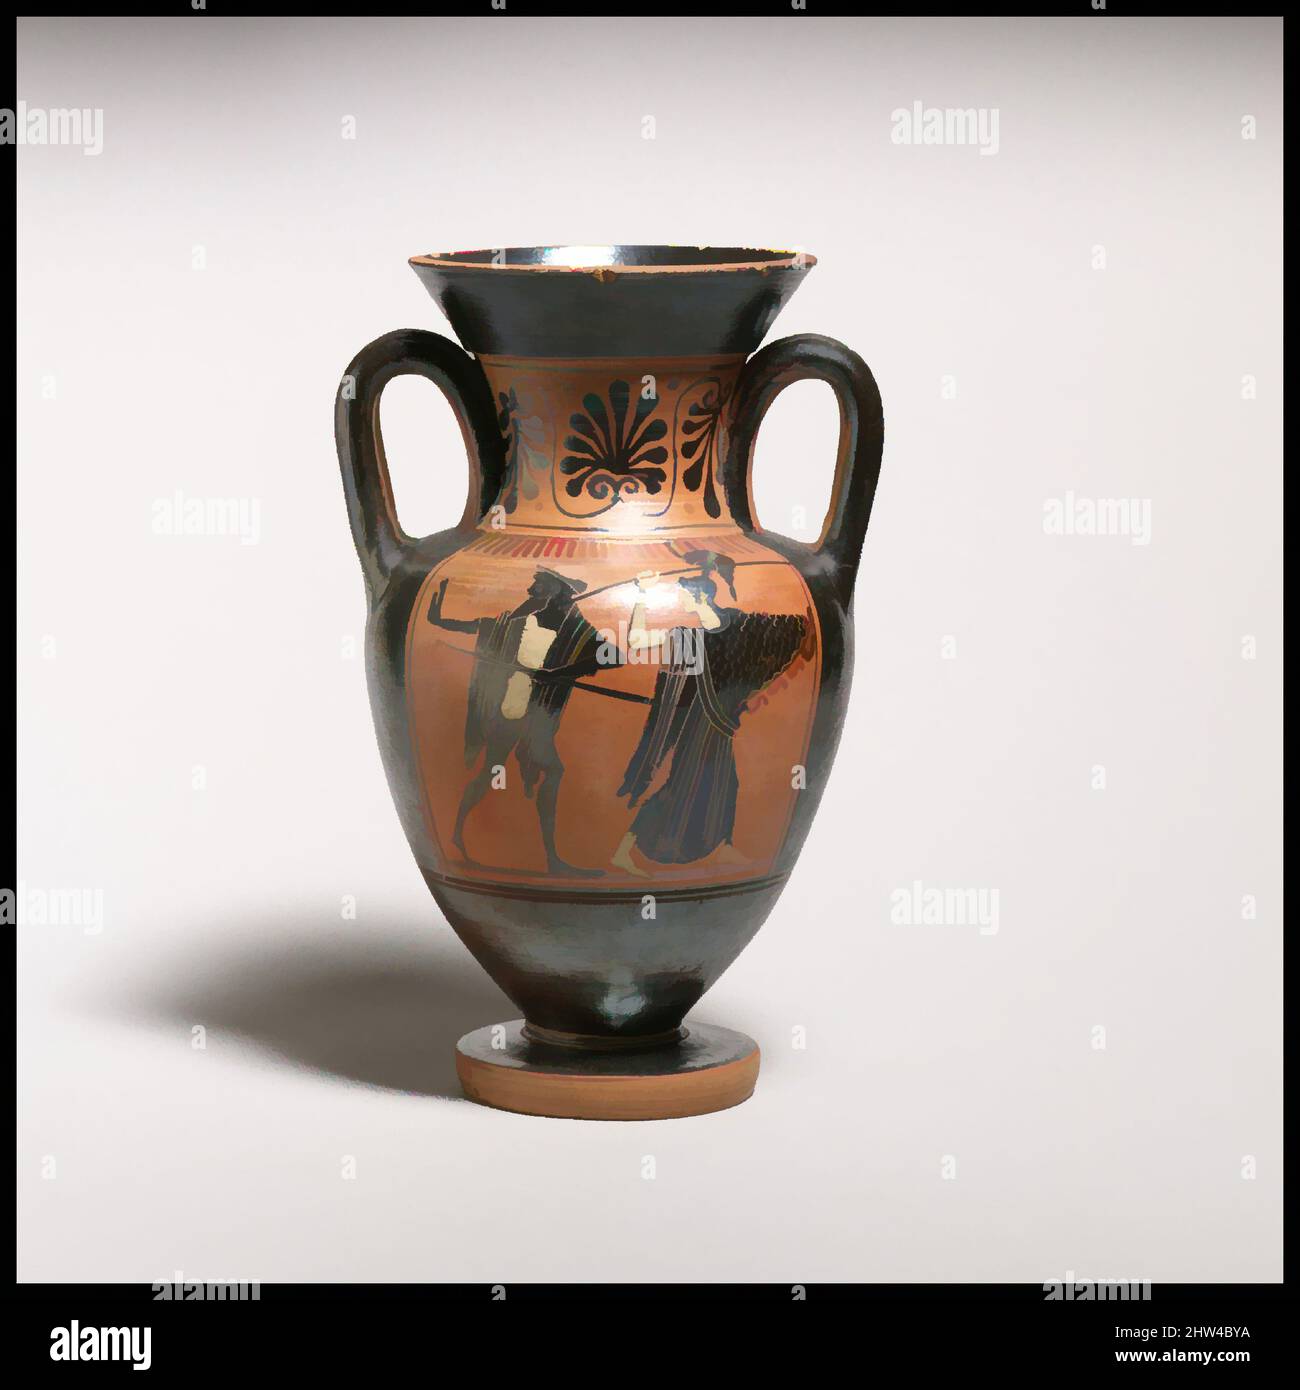 Art inspired by Terracotta neck-amphora (jar) with double handles, Archaic, ca. 500 B.C., Greek, Attic, Terracotta; black-figure, H. 6 7/8 in. (17.5 cm.), Vases, Obverse, Herakles and Kerberos at the house of Hades; meaningless inscriptions, Reverse, Hermes and Athena; meaningless, Classic works modernized by Artotop with a splash of modernity. Shapes, color and value, eye-catching visual impact on art. Emotions through freedom of artworks in a contemporary way. A timeless message pursuing a wildly creative new direction. Artists turning to the digital medium and creating the Artotop NFT Stock Photo